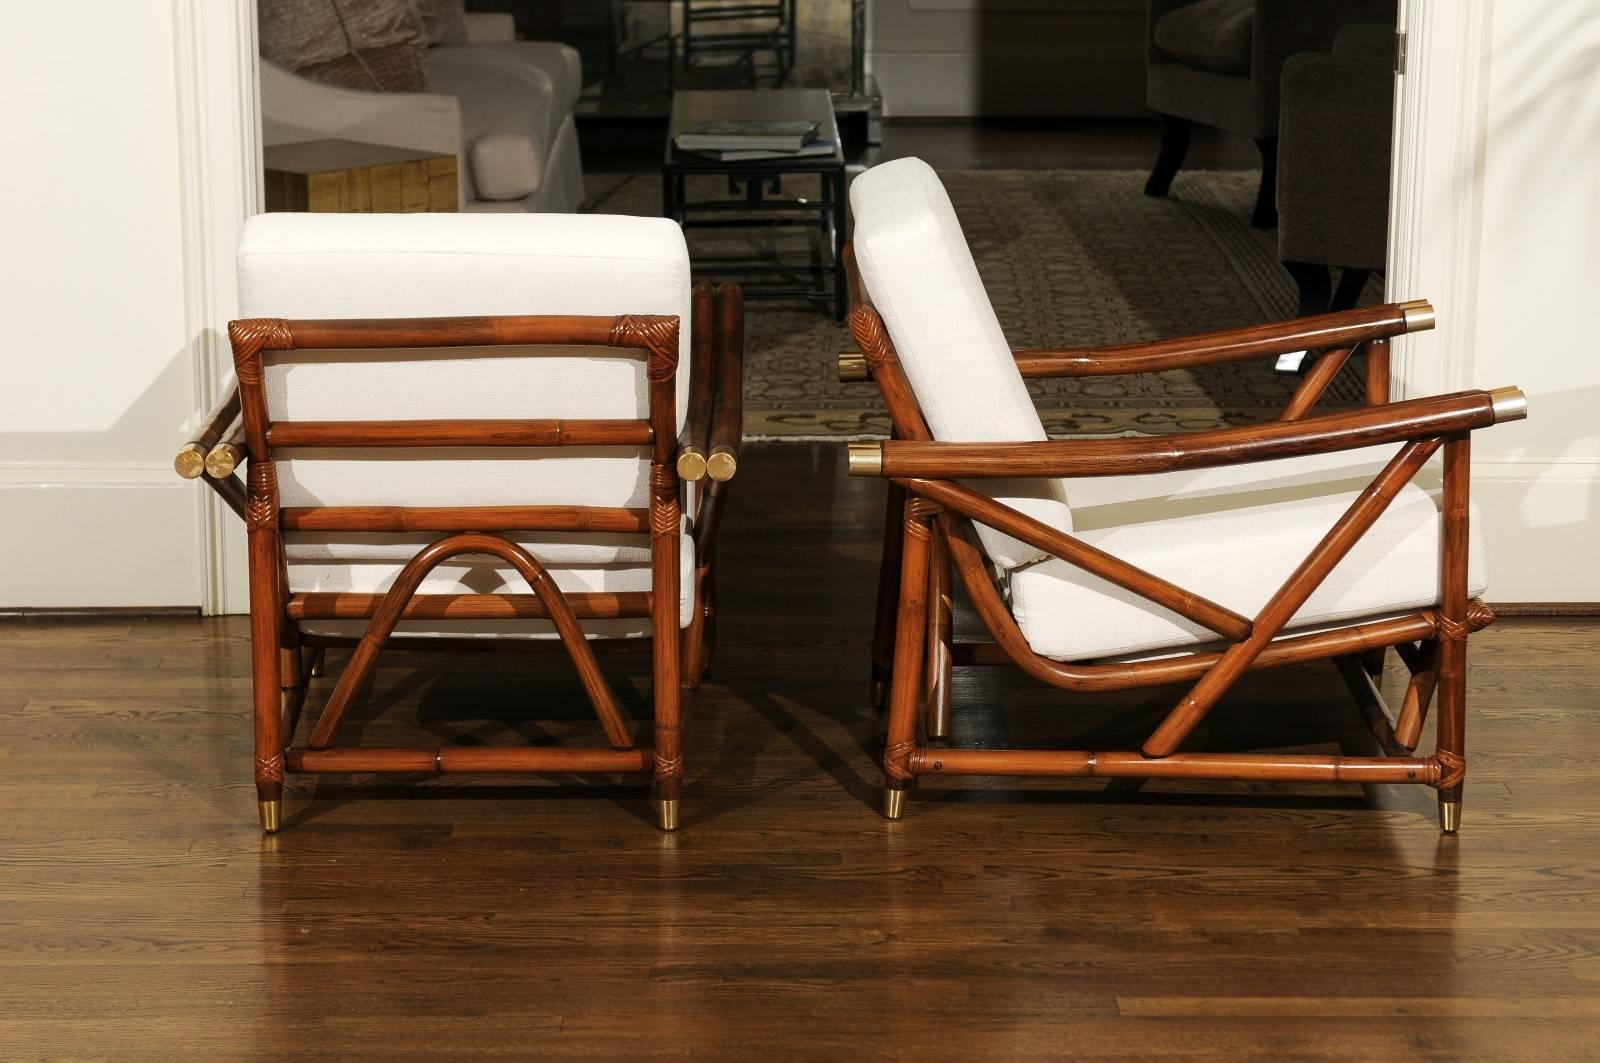 Rattan Stylish Restored Pair of Vintage Modern Loungers with Brass Accents